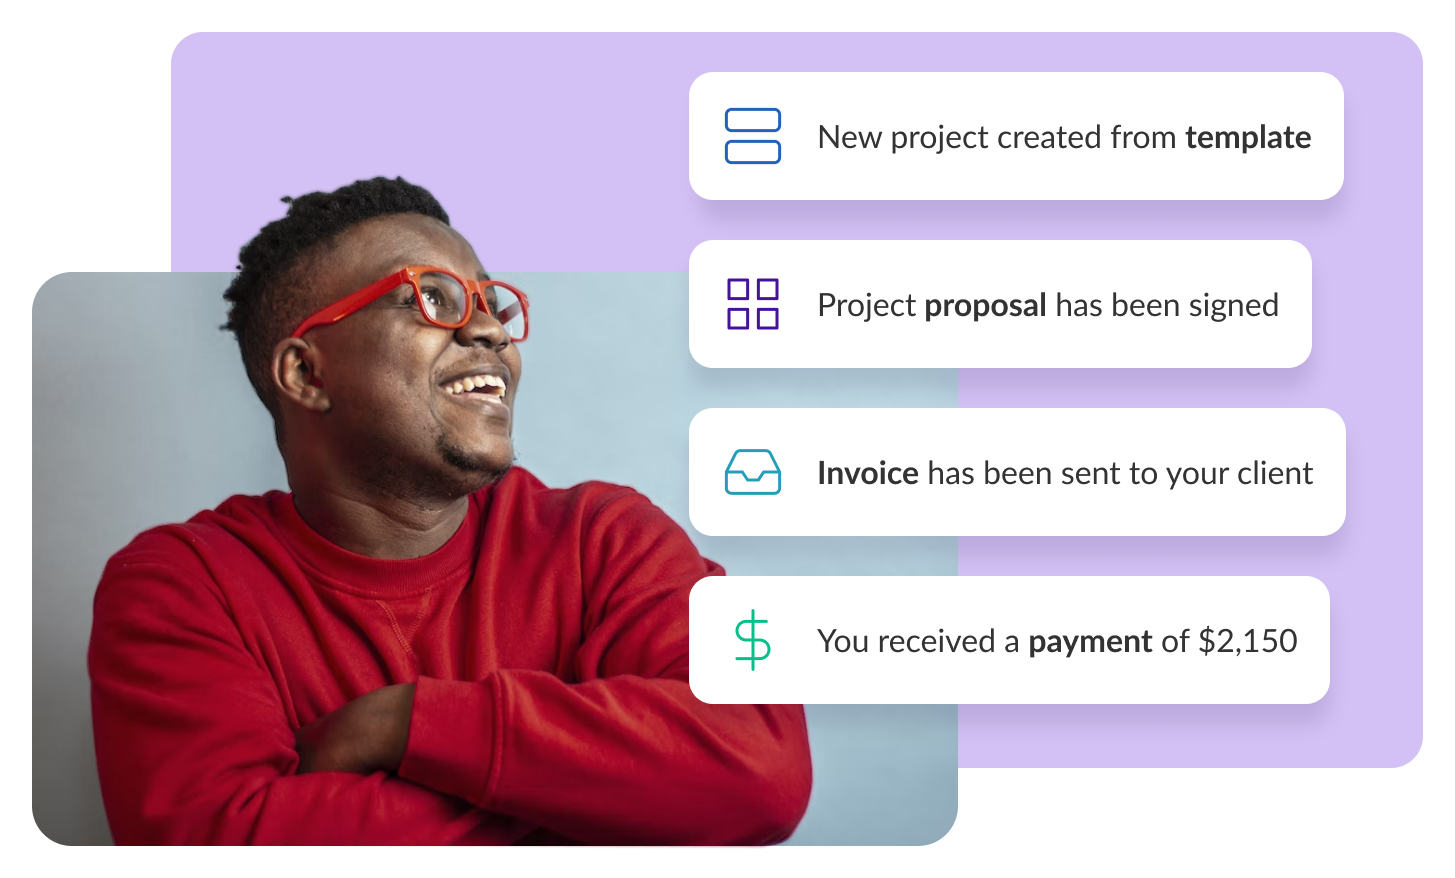 Wethos Software - Create projects from scope of work templates, send proposals for signature, create and send invoices for clients, and get paid without ever having to switch tabs.